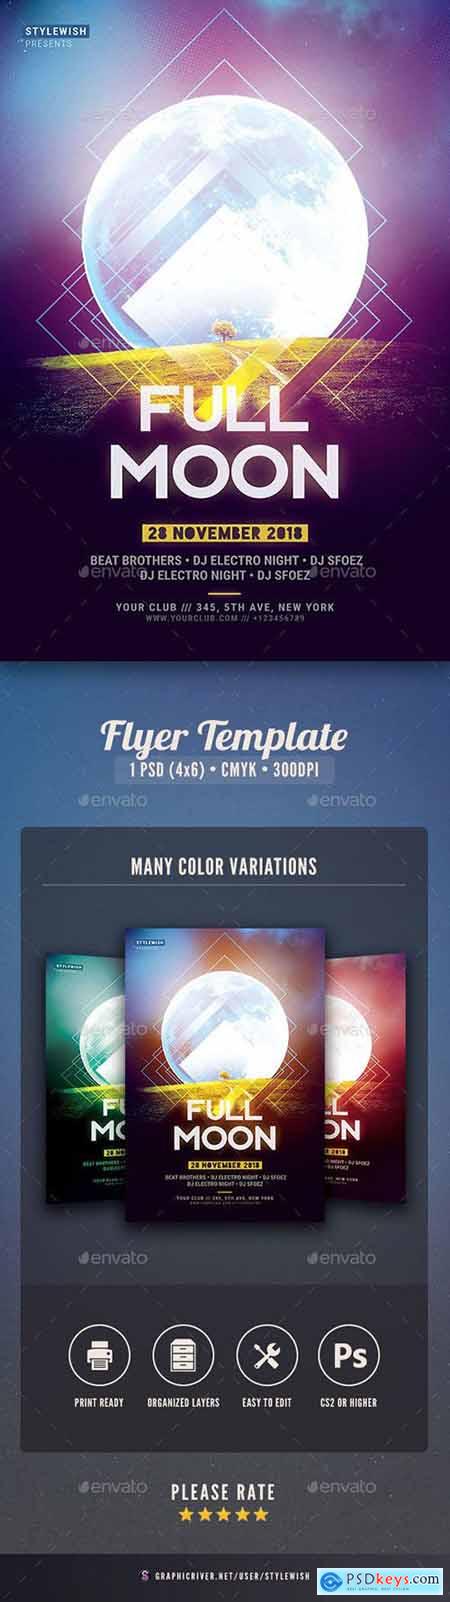 Graphicriver Full Moon Flyer